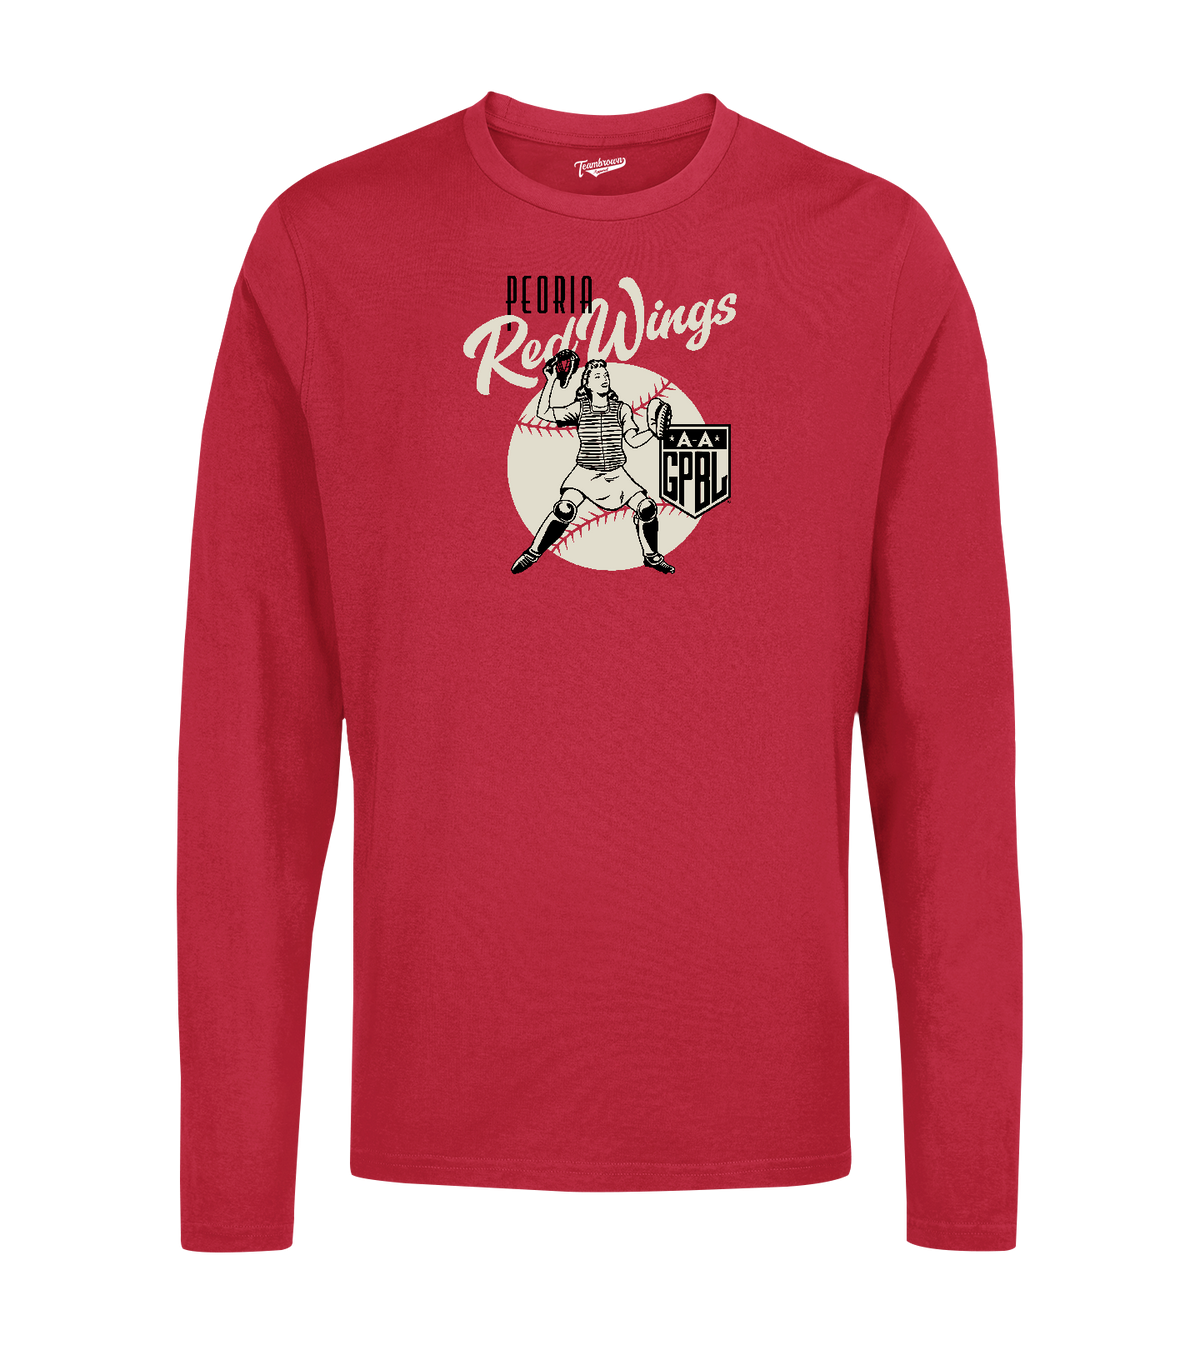 Diamond - Peoria Redwings - Unisex Long Sleeve Crew T-Shirt | Officially Licensed - AAGPBL